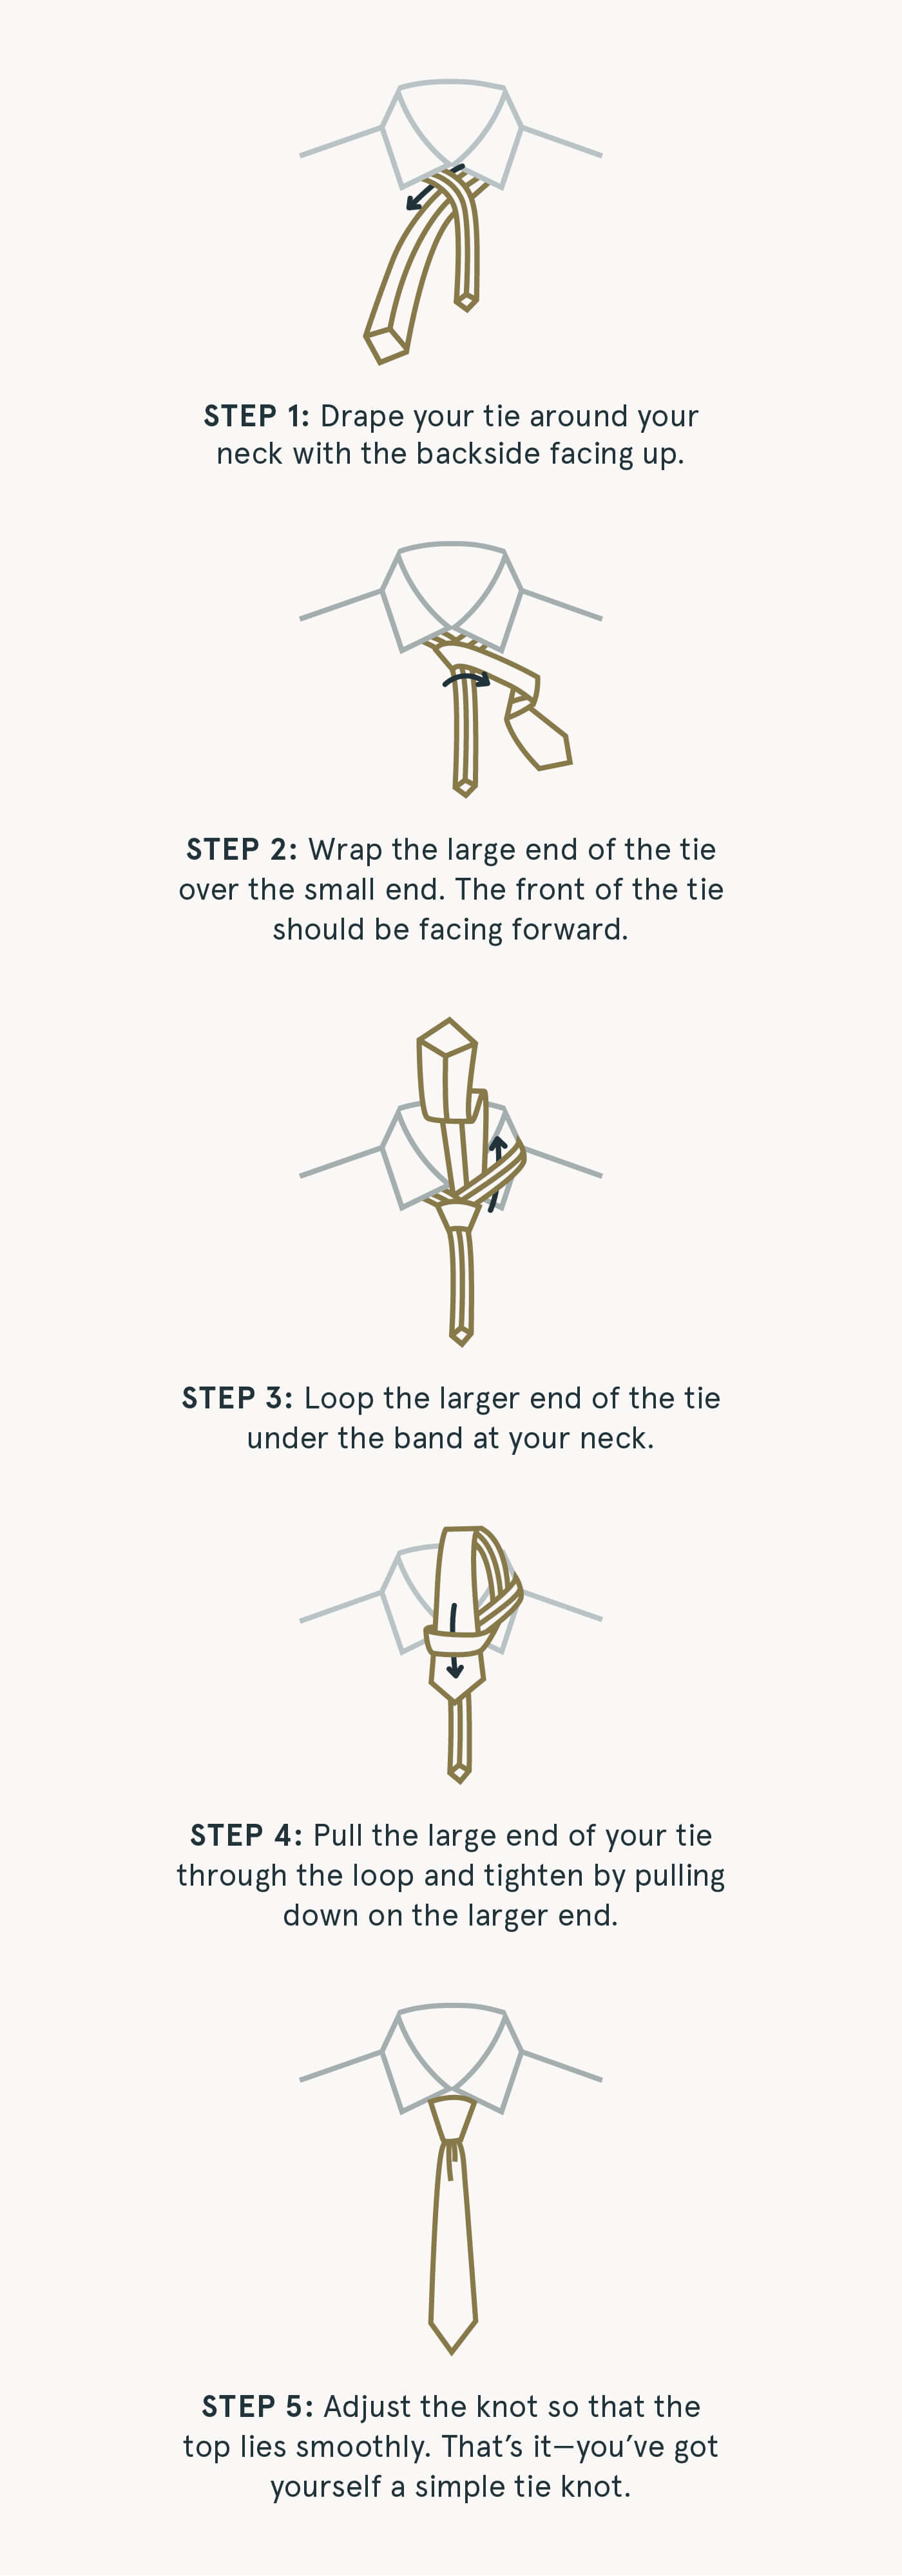 Graphic illustration of Stitch Fix’s five steps on how to tie a simple-knot tie.  